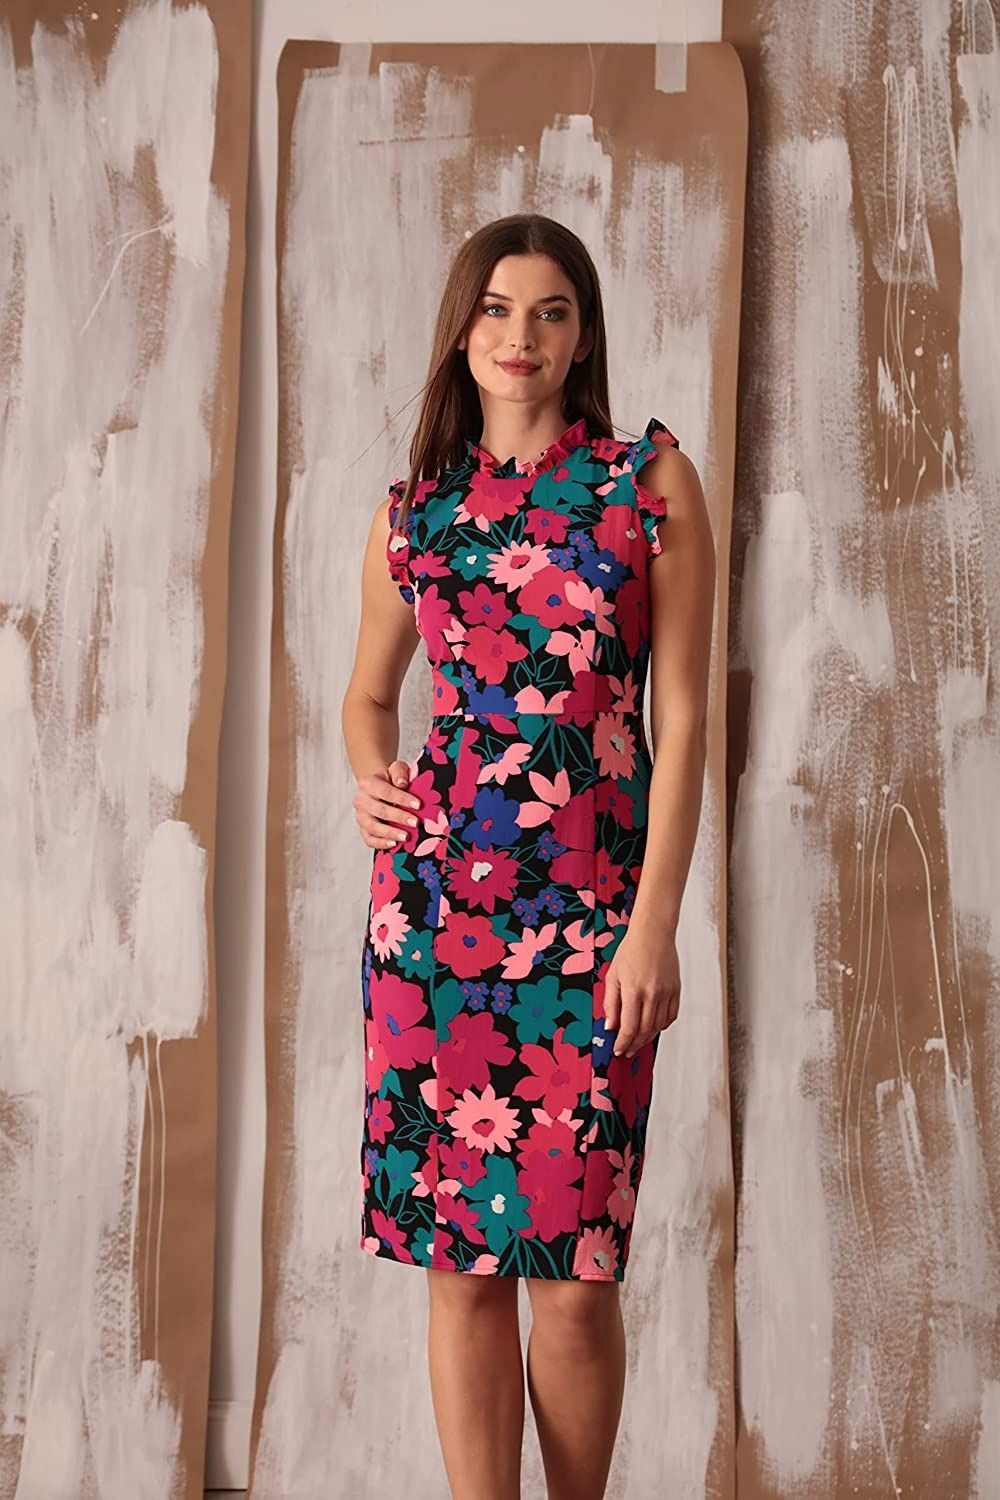 Top more than 255 floral print dress latest